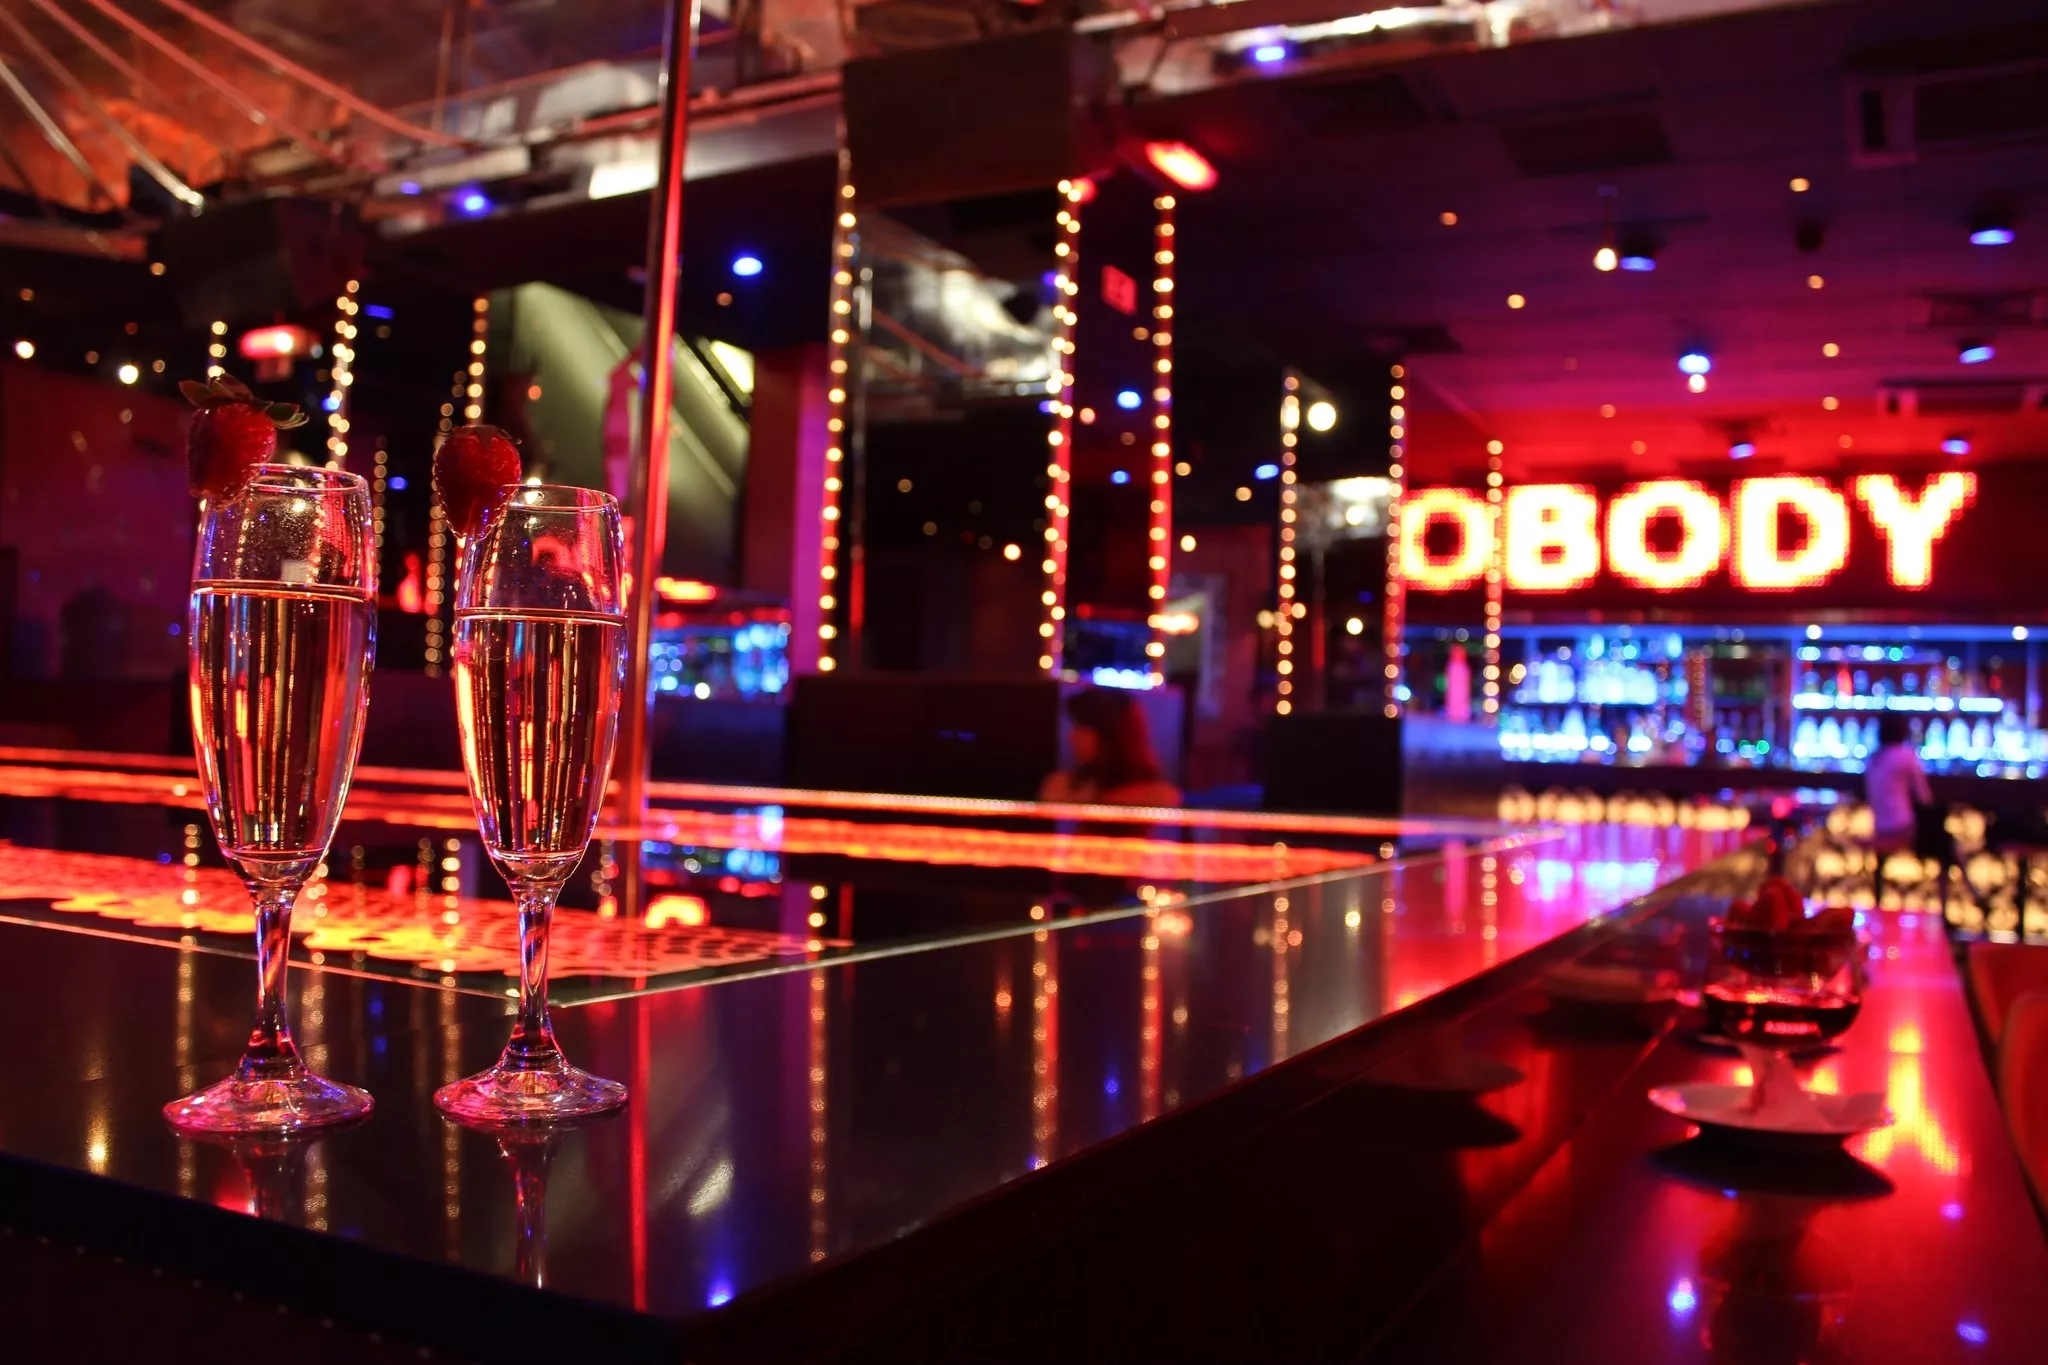 Body Club in Portugal, Europe | Strip Clubs,Sex-Friendly Places - Rated 0.6